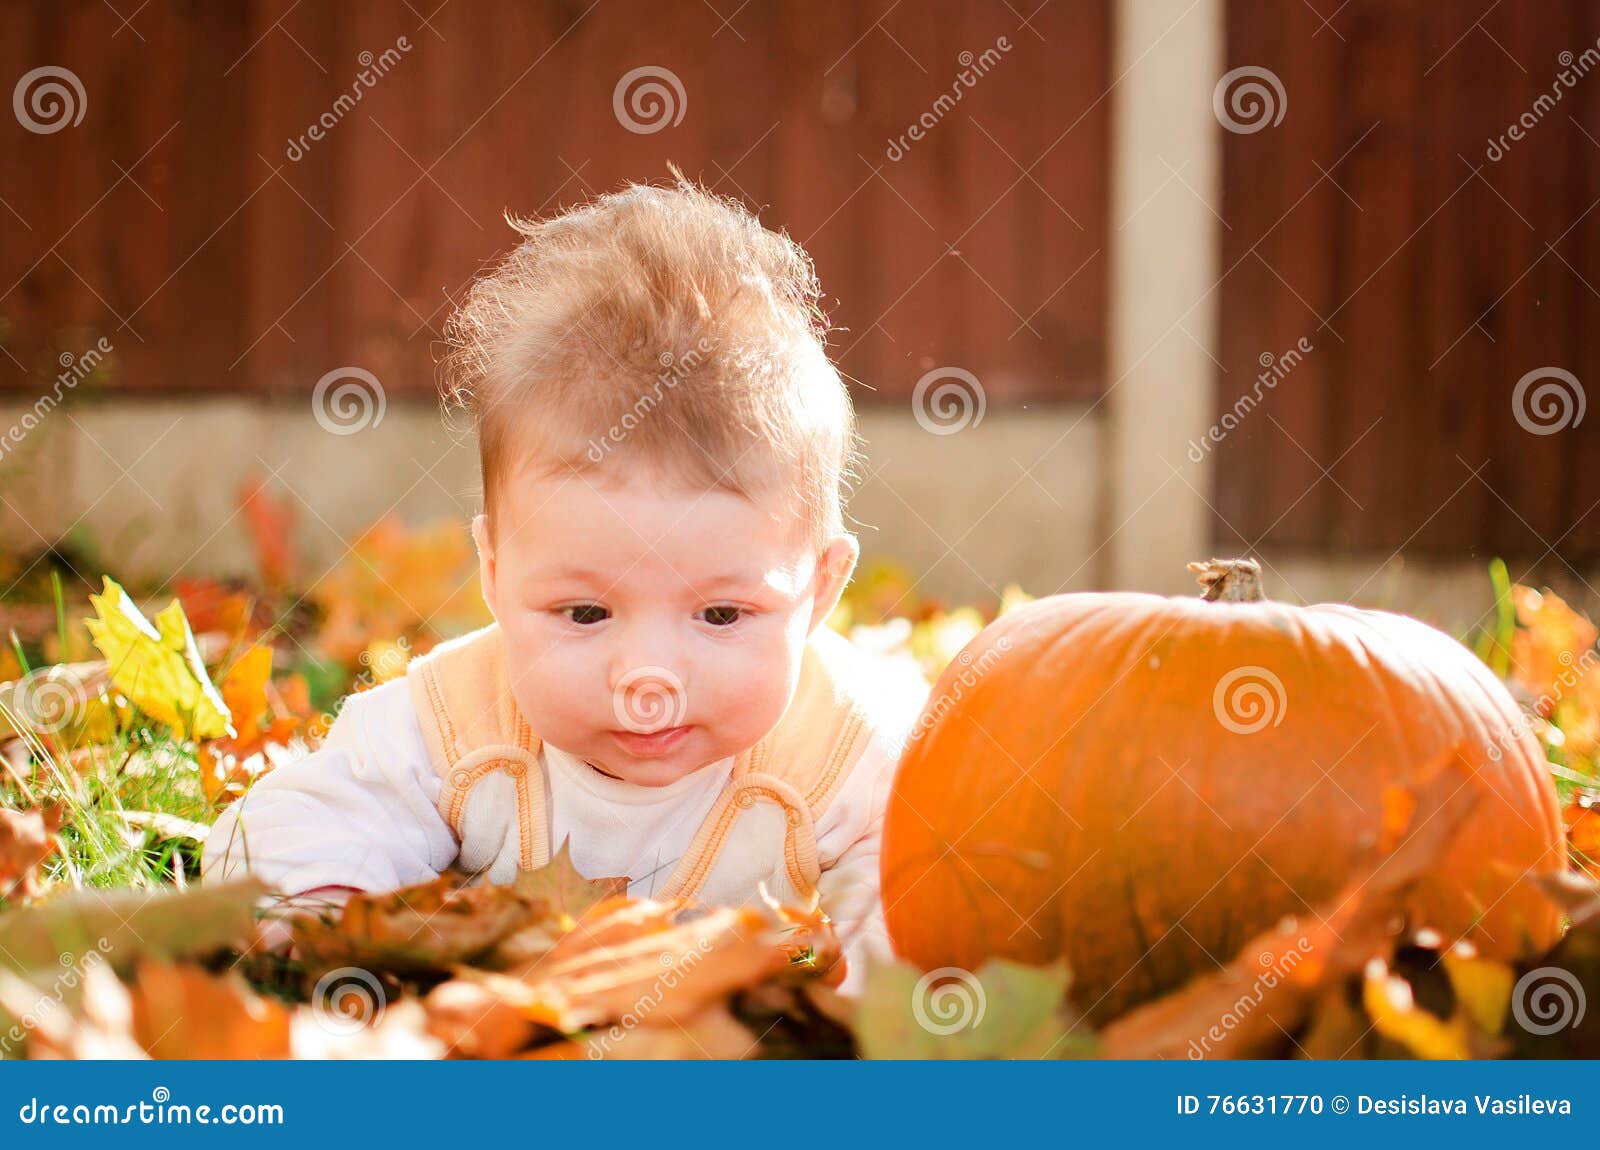 Baby girl with pumpkin stock photo. Image of funky, fall - 76631770